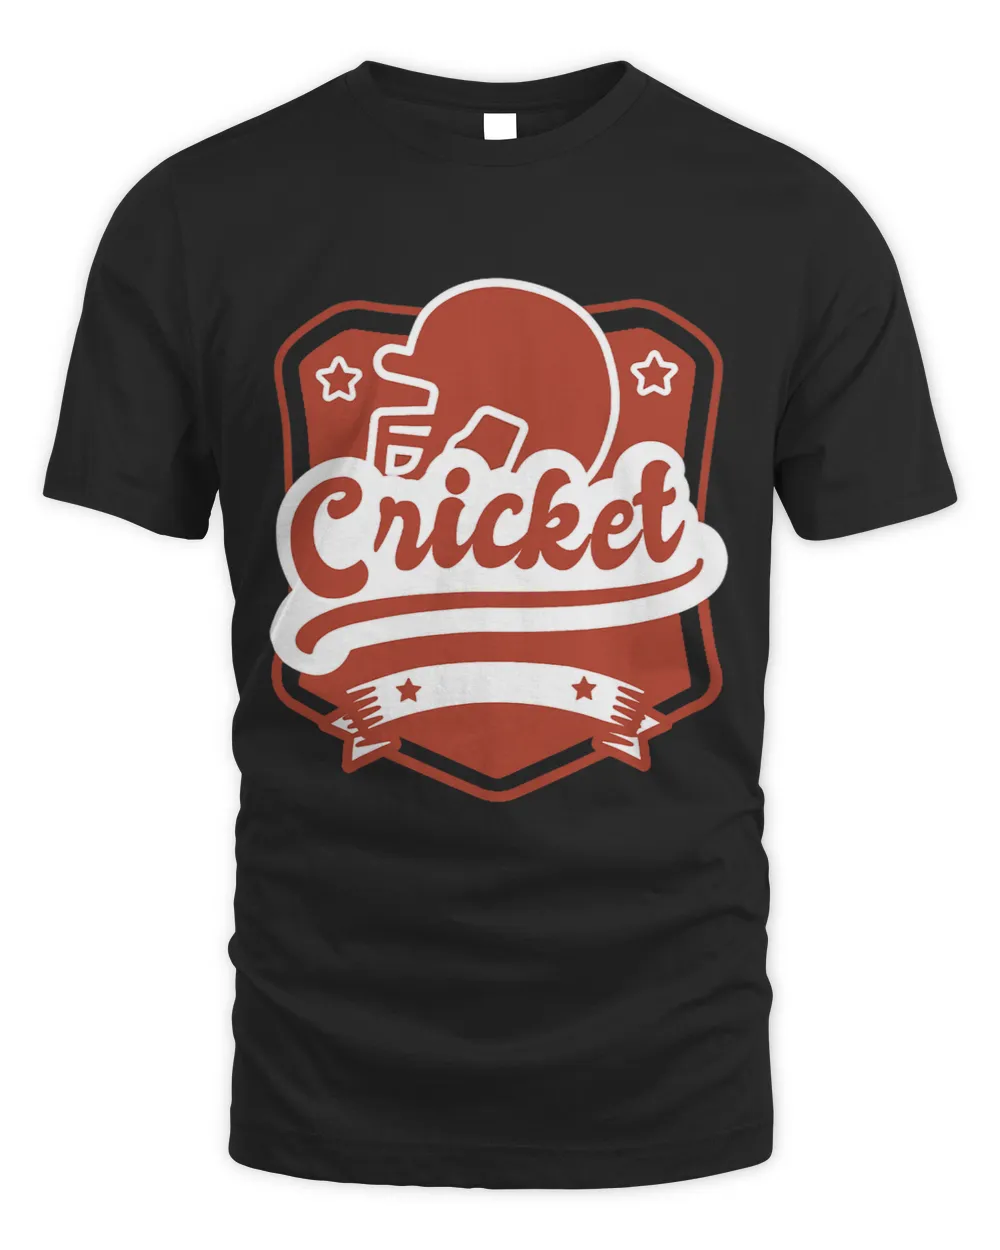 Cricket Fan Awesome Retro CRICKET Designs For Cricket Players Present